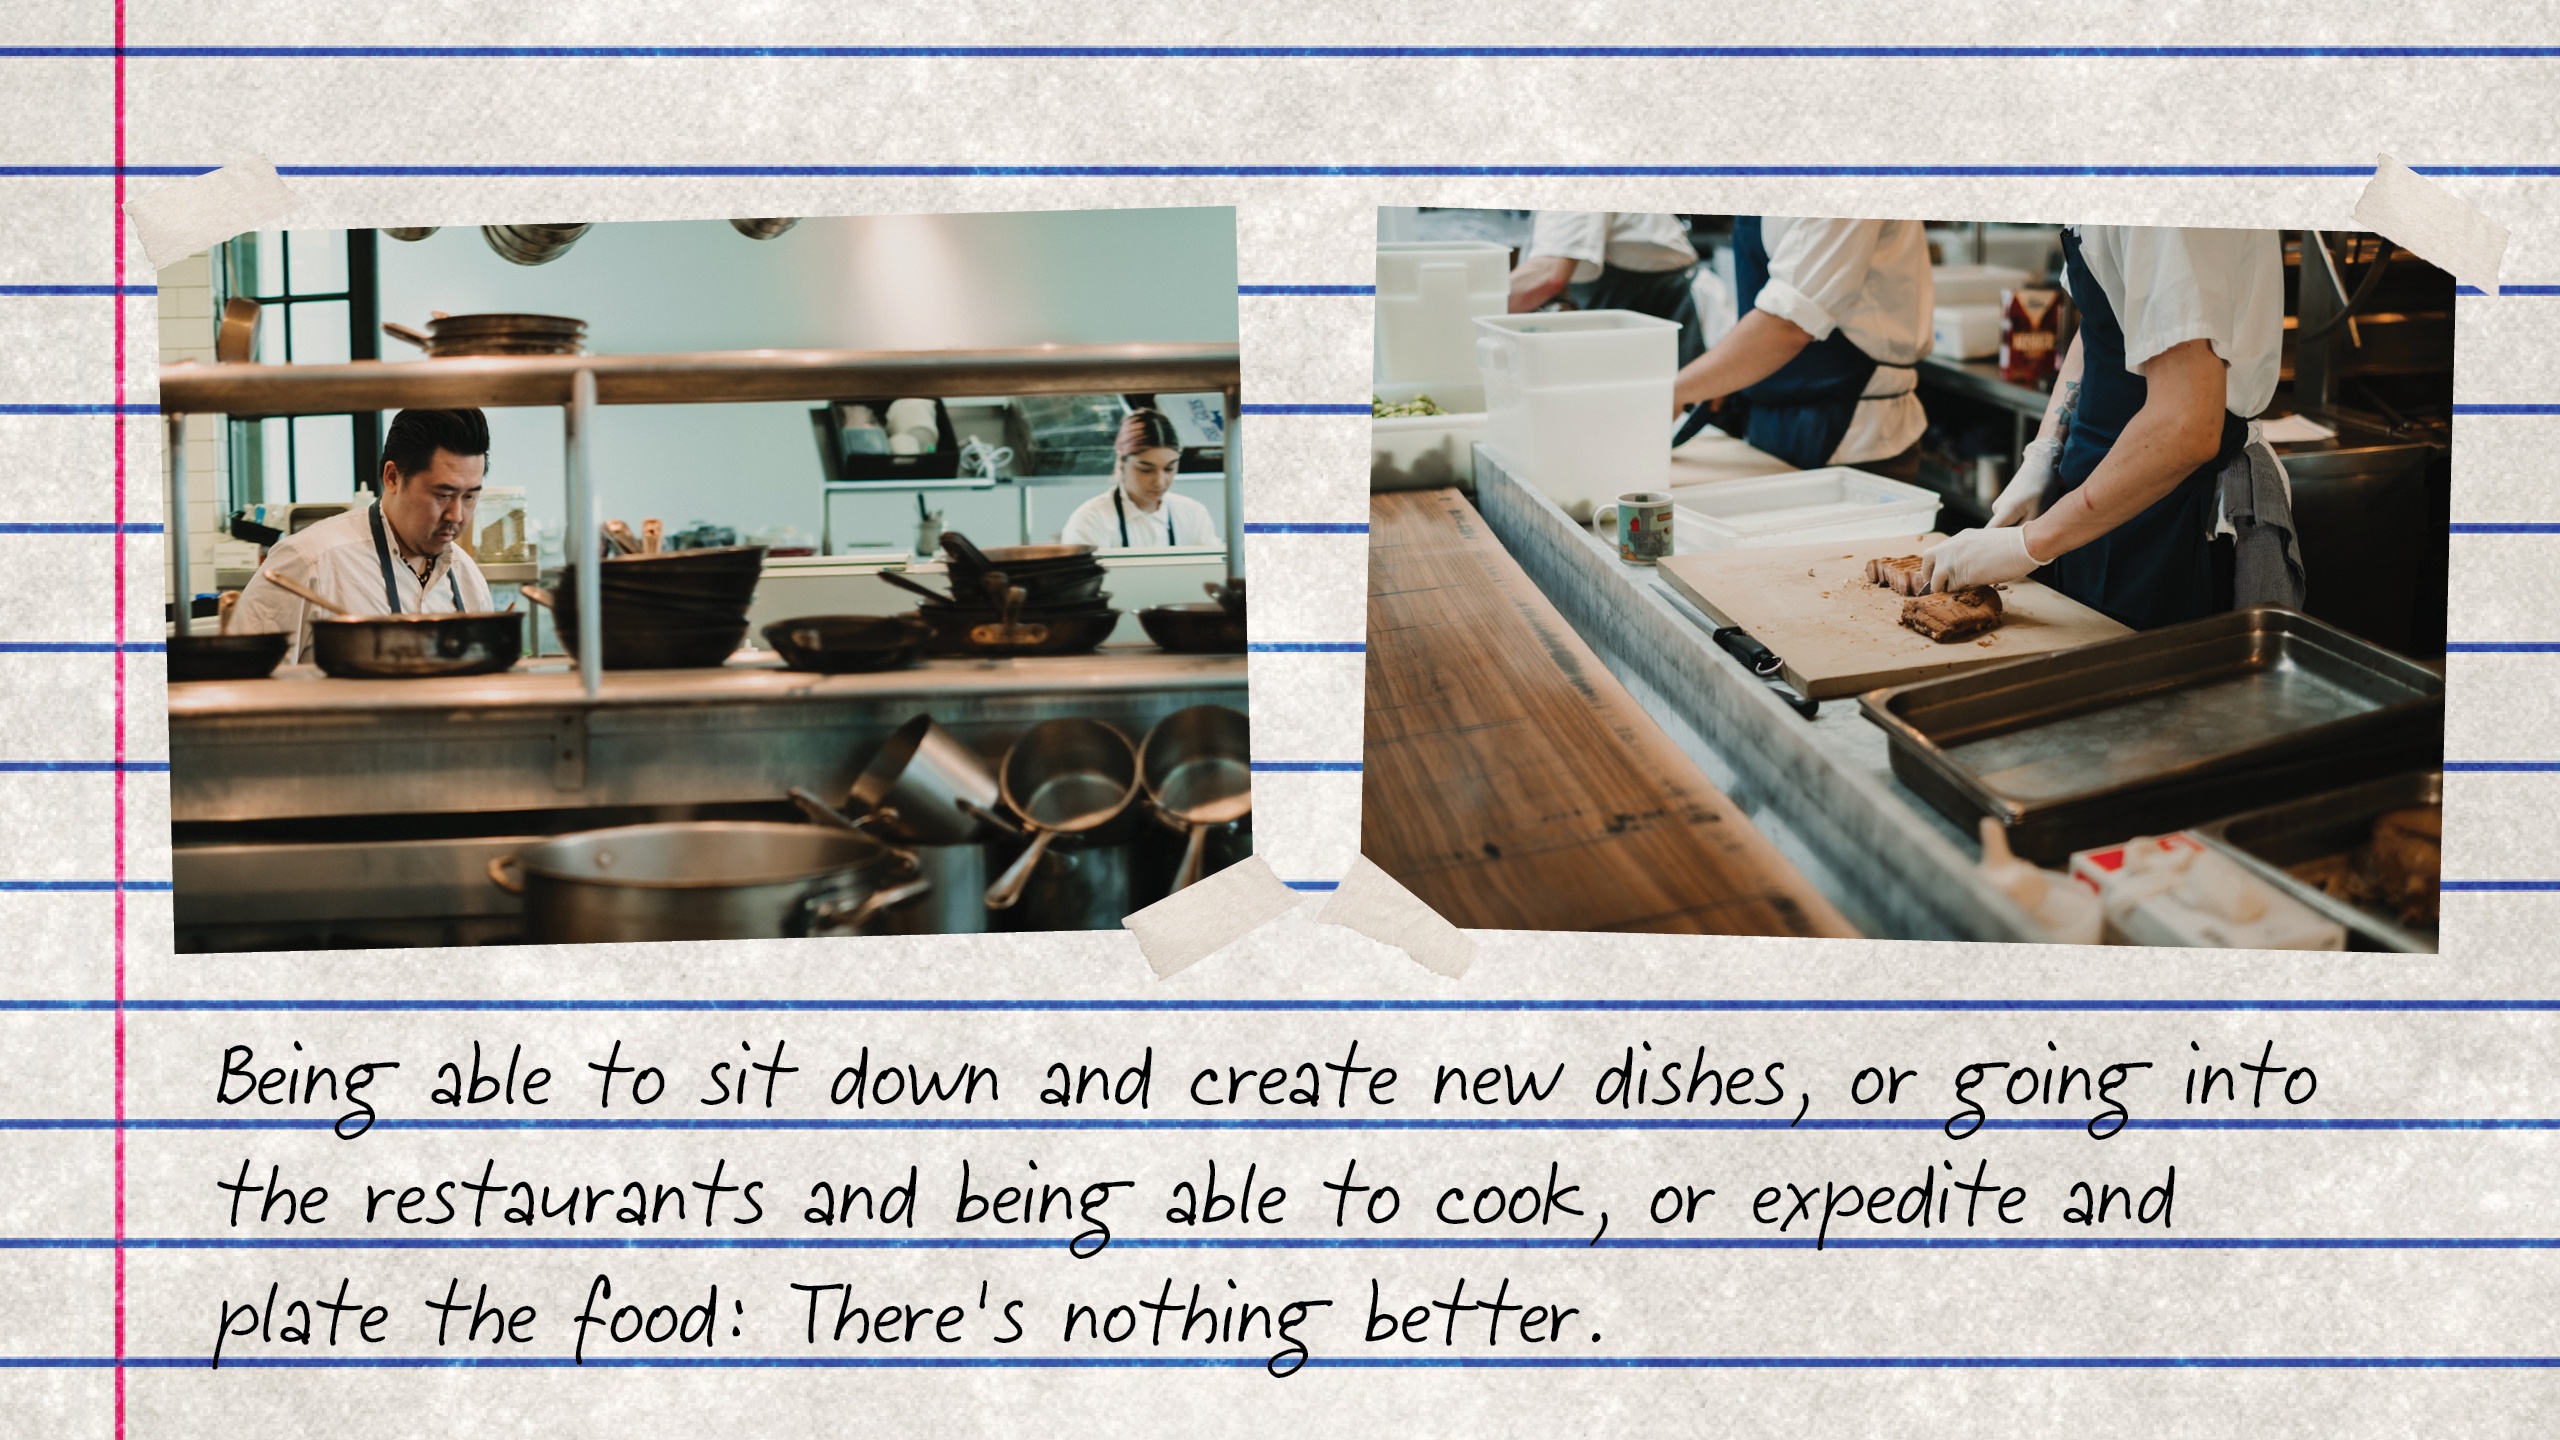 Gavin Kaysen pull quote creating new dishes pre-pandemic April 2020